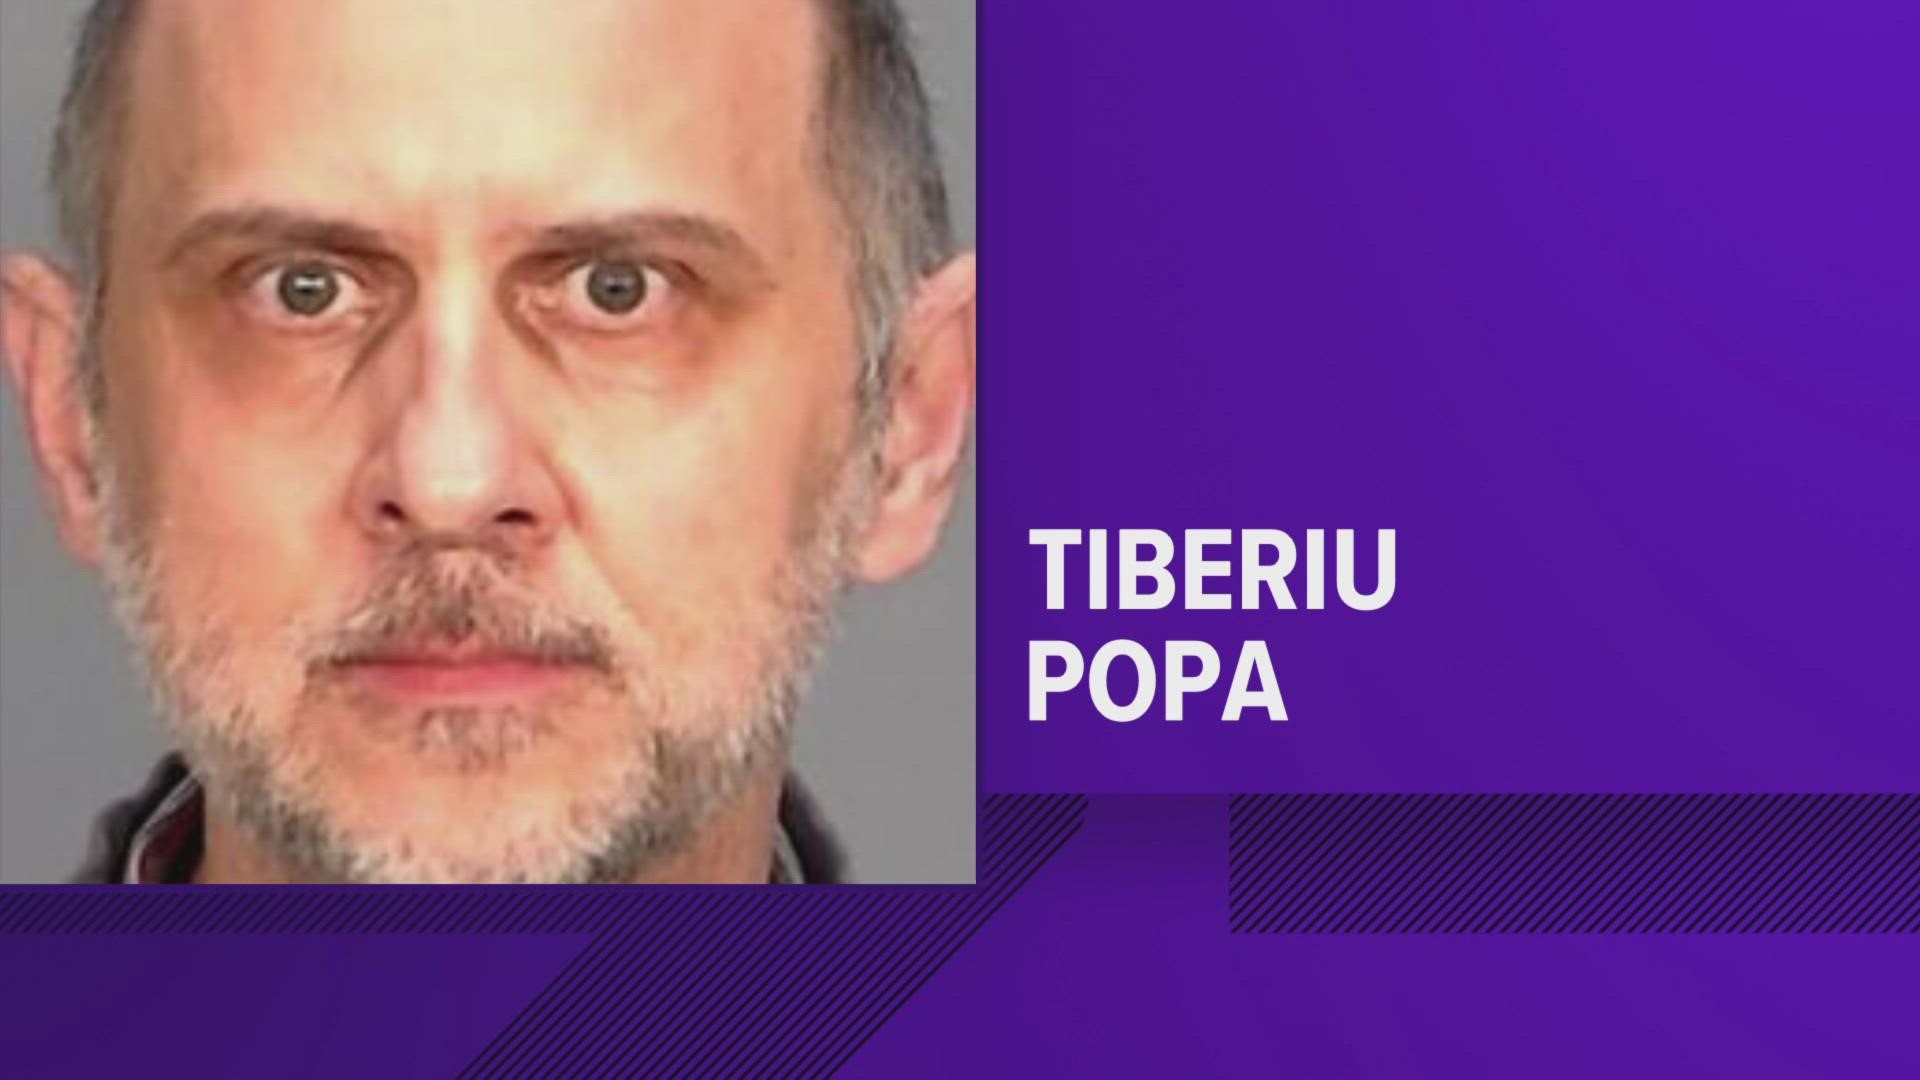 Officers said Tiberiu Popa then denied viewing such images, but later admitted to it when they searched his home.